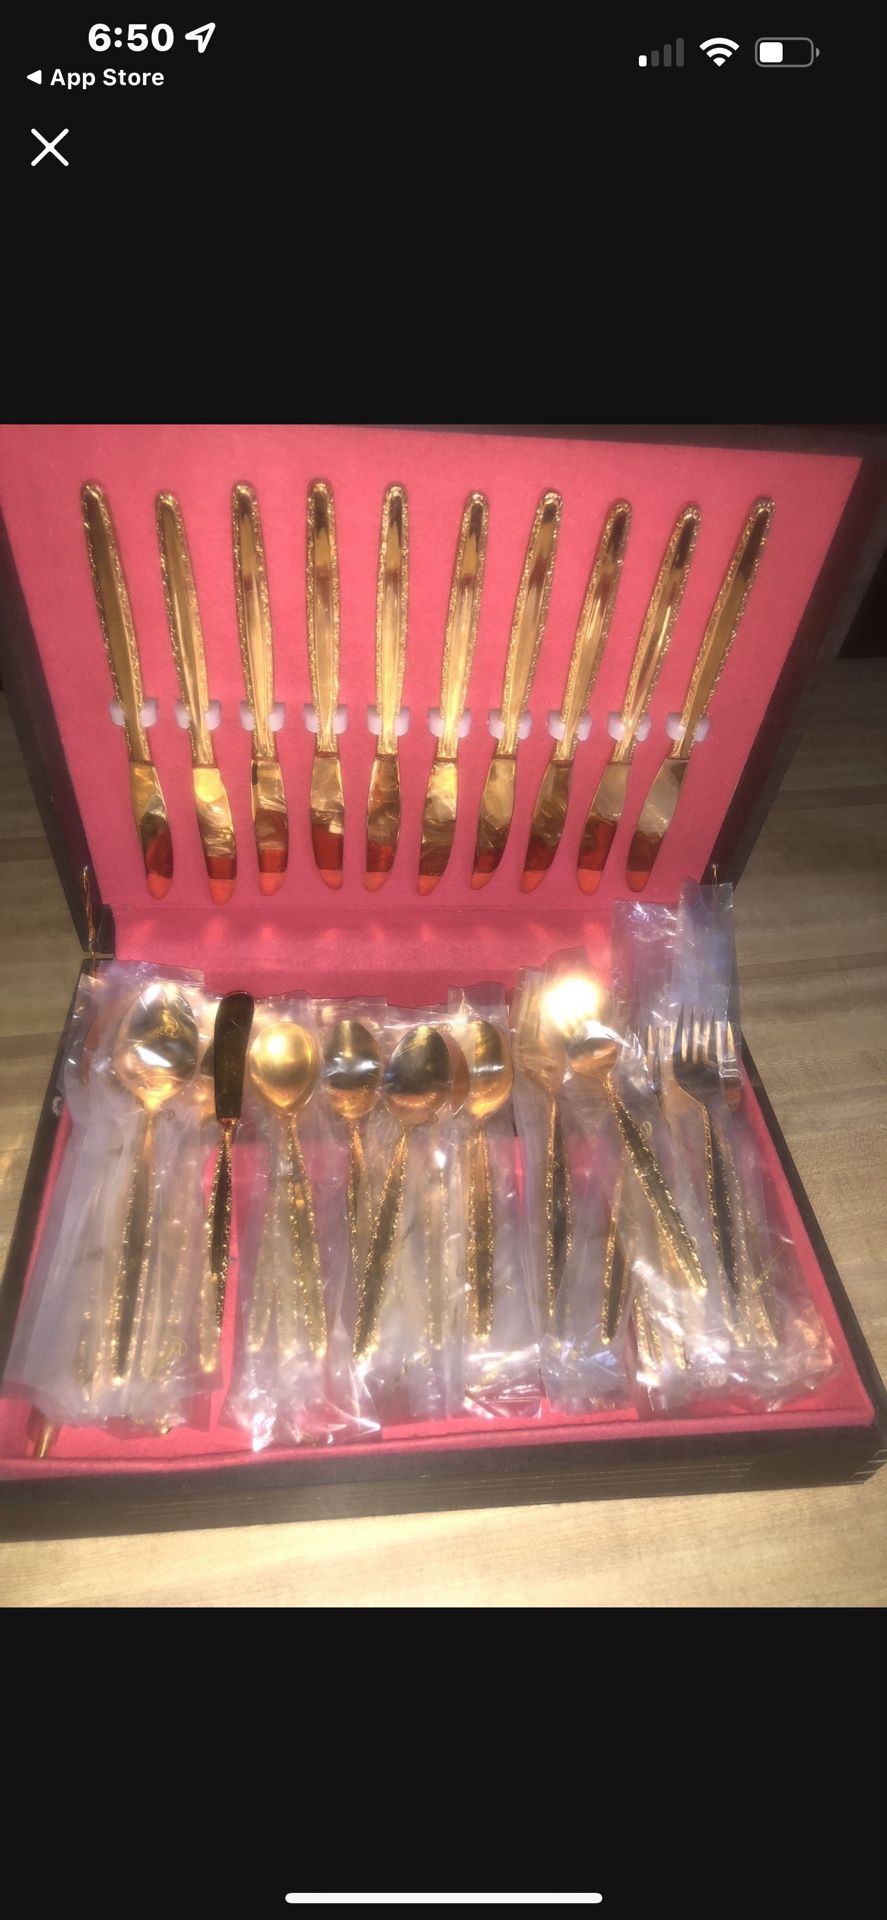 Flatware/Silverware Gold plated over stainless steel by Riviera